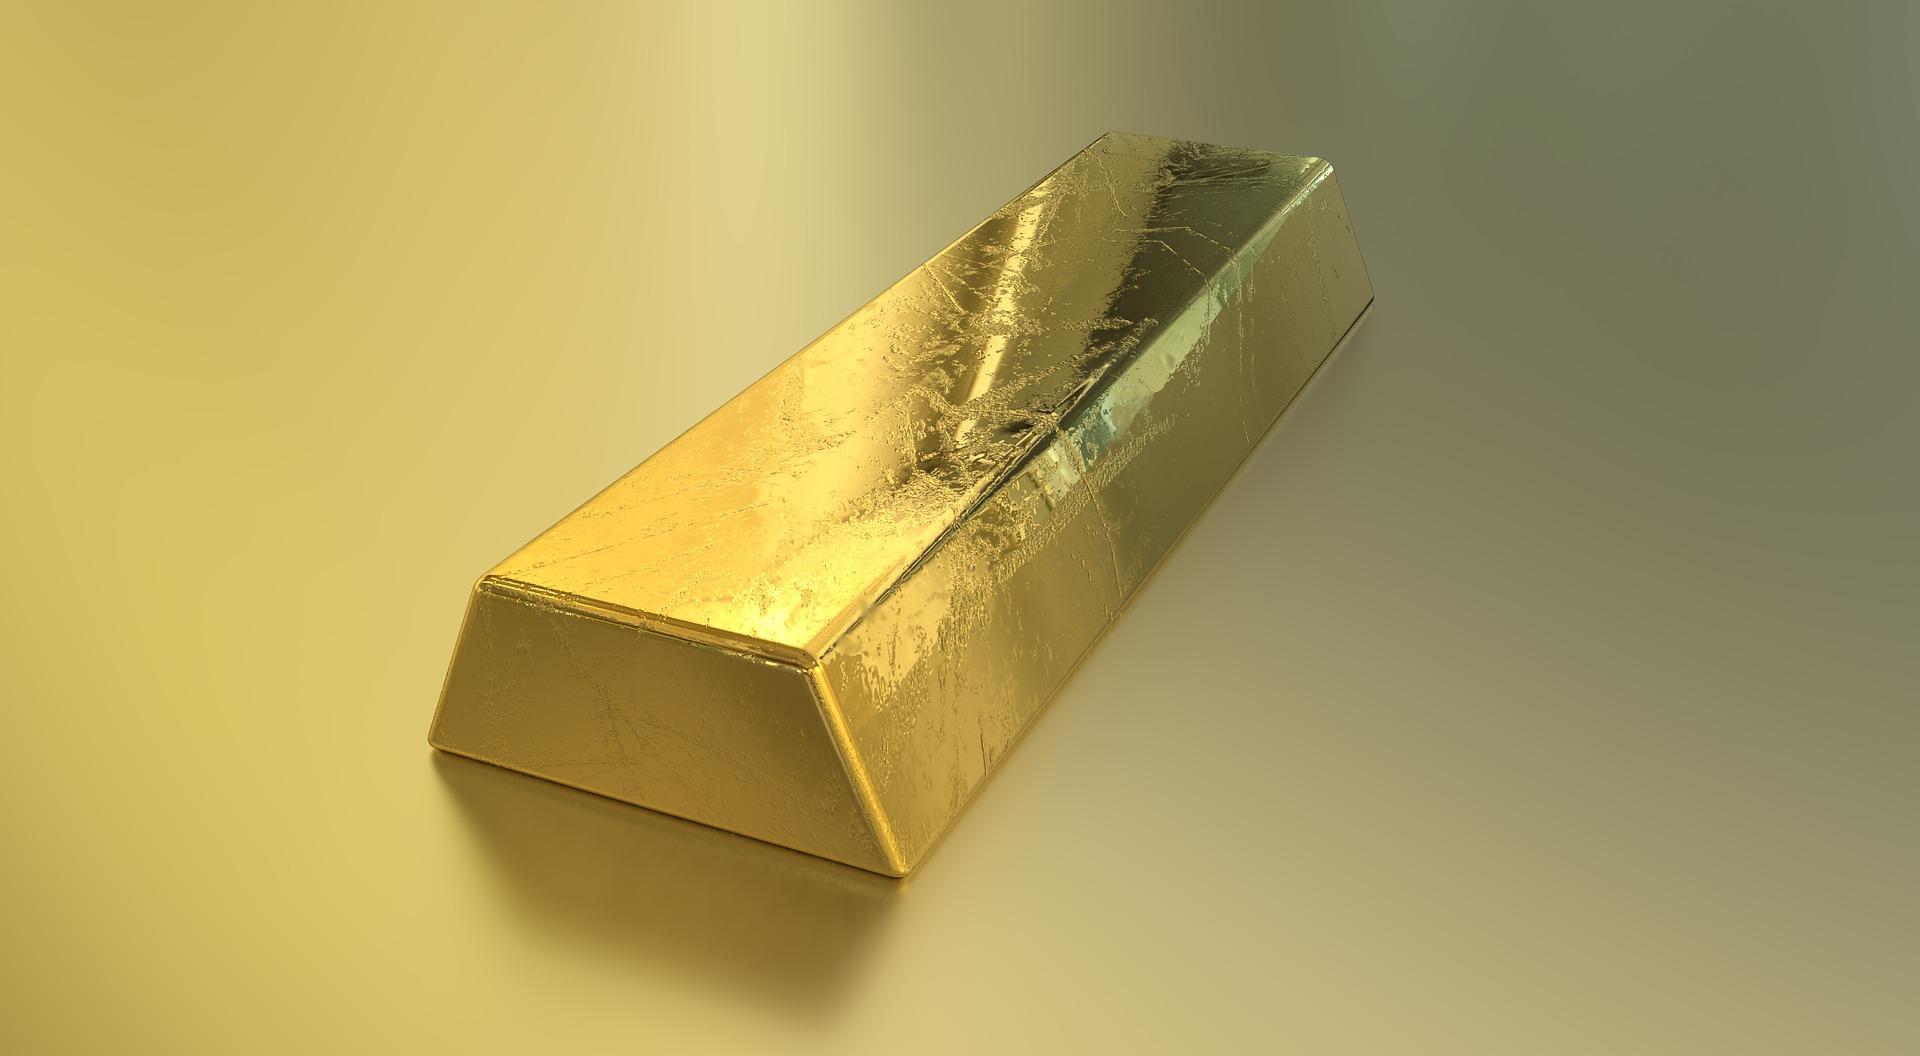 melting point of gold